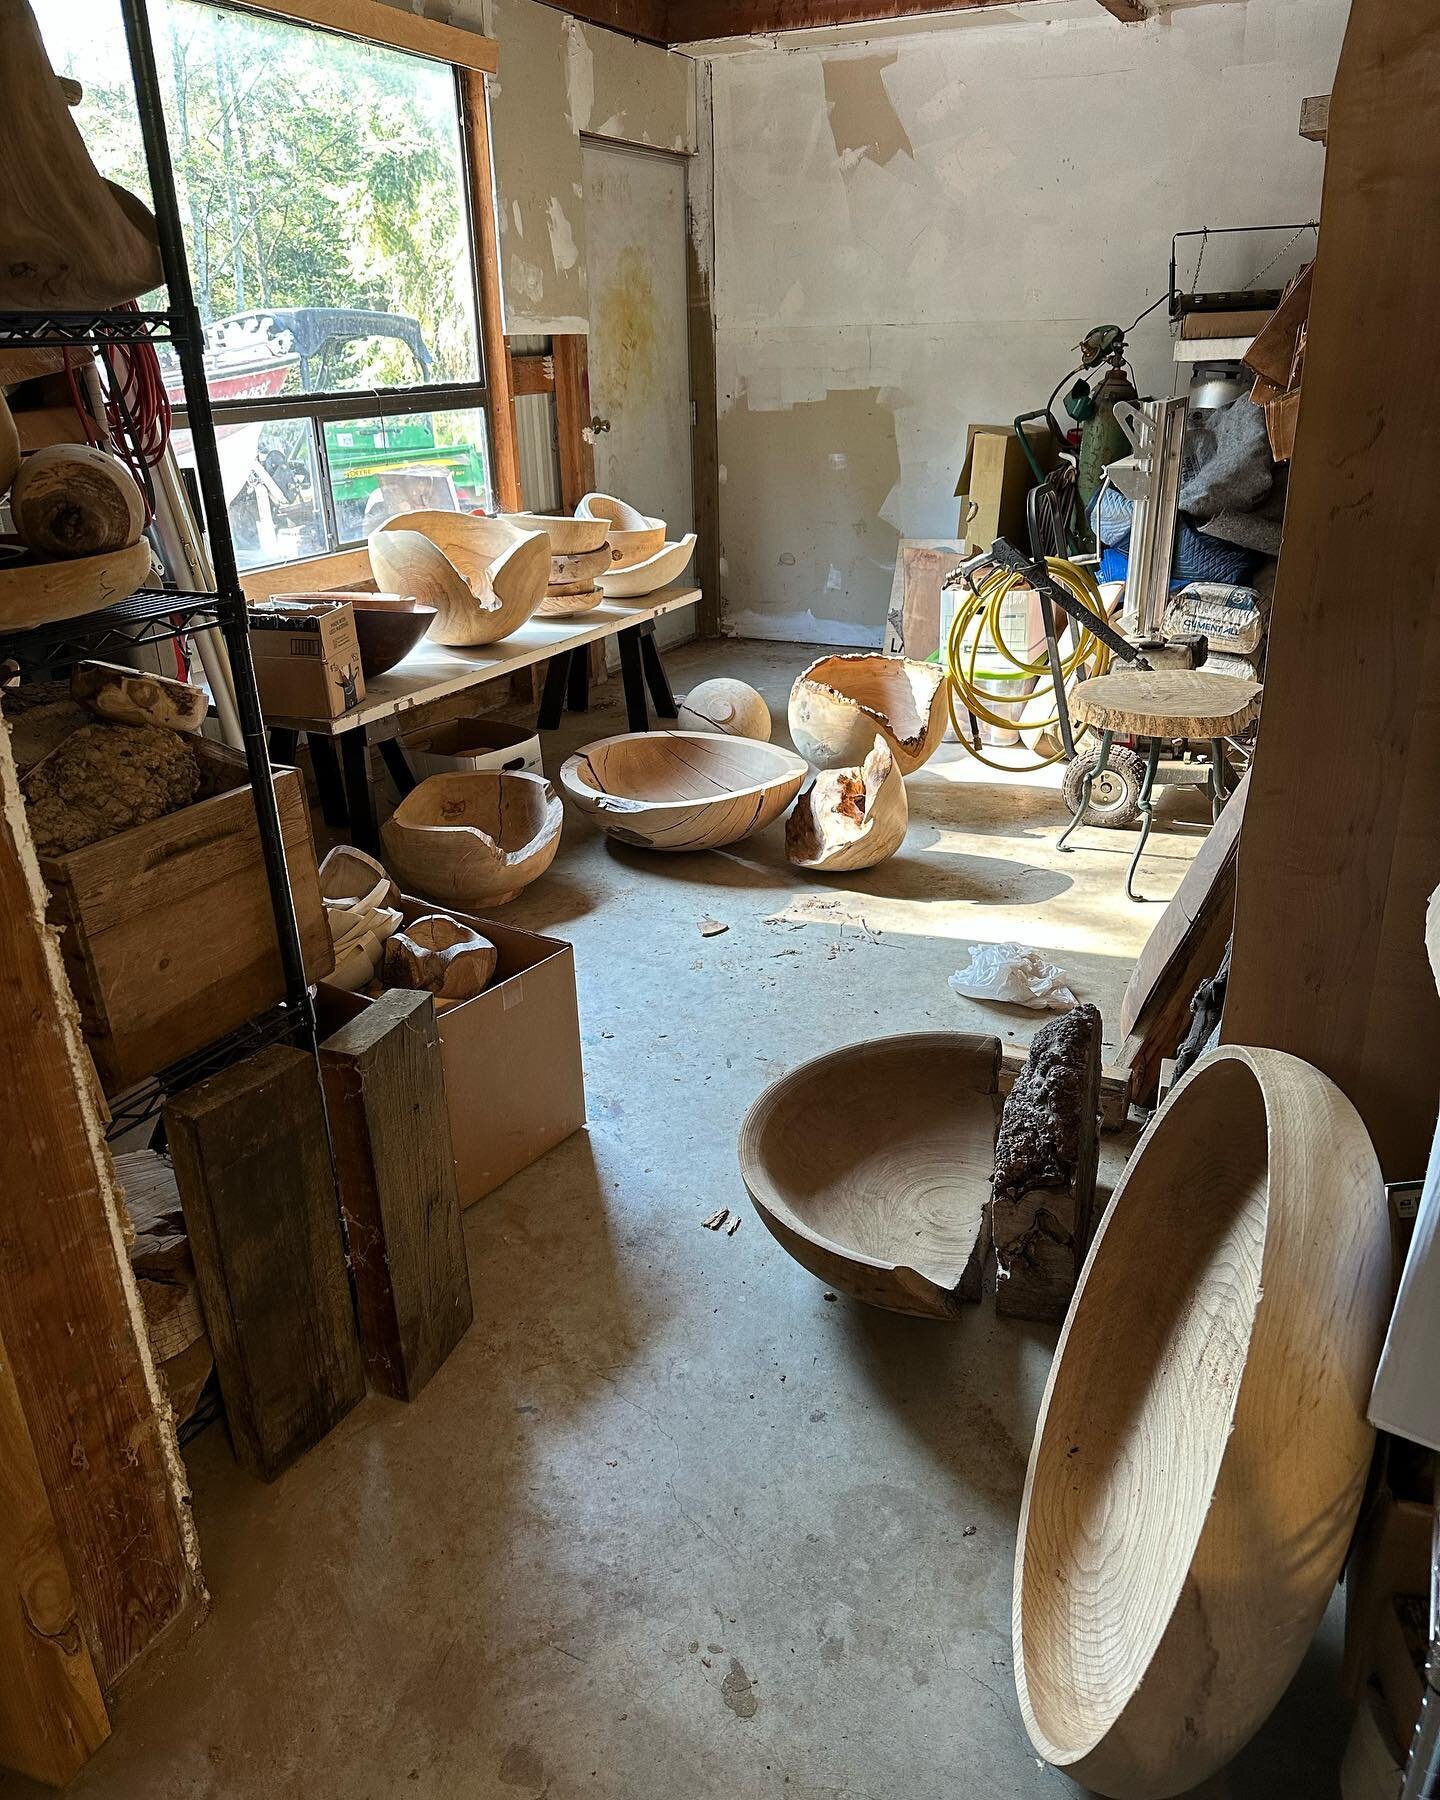 Big and delicious &mdash; some pieces for the august studio tour on Orcas Island - see earlier post for dates